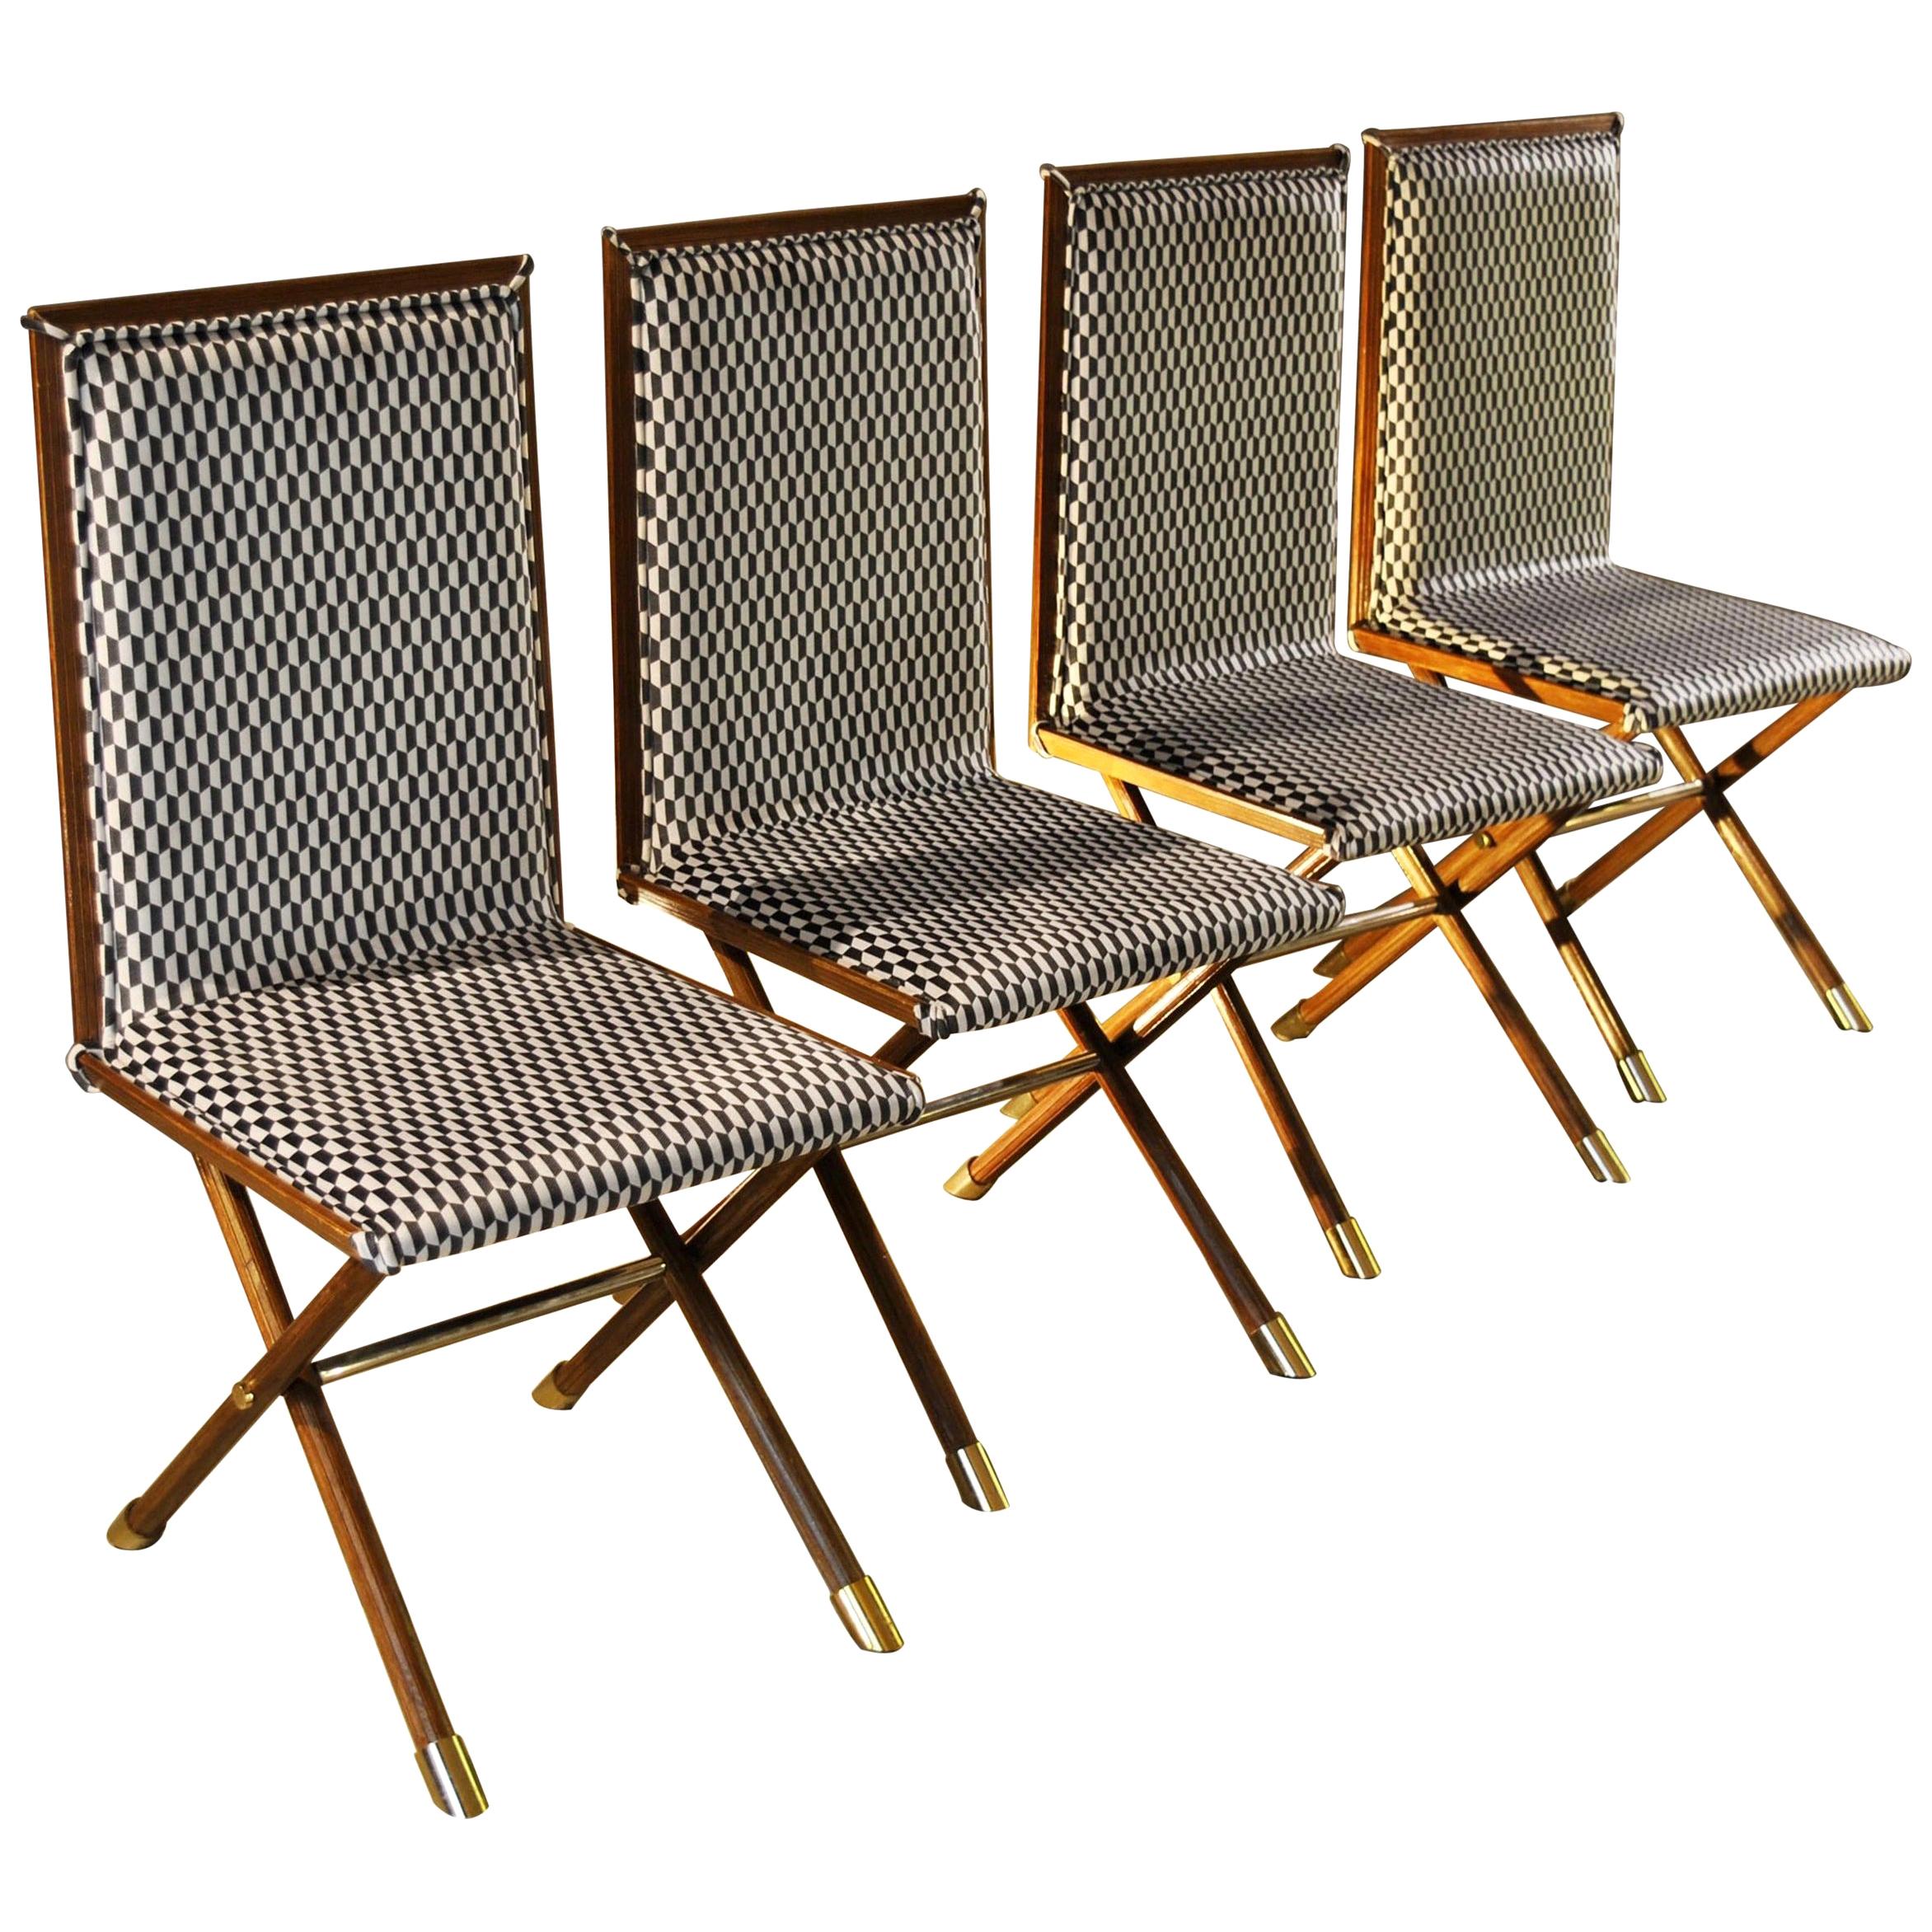 Italian Midcentury Chairs with Brass Fittings